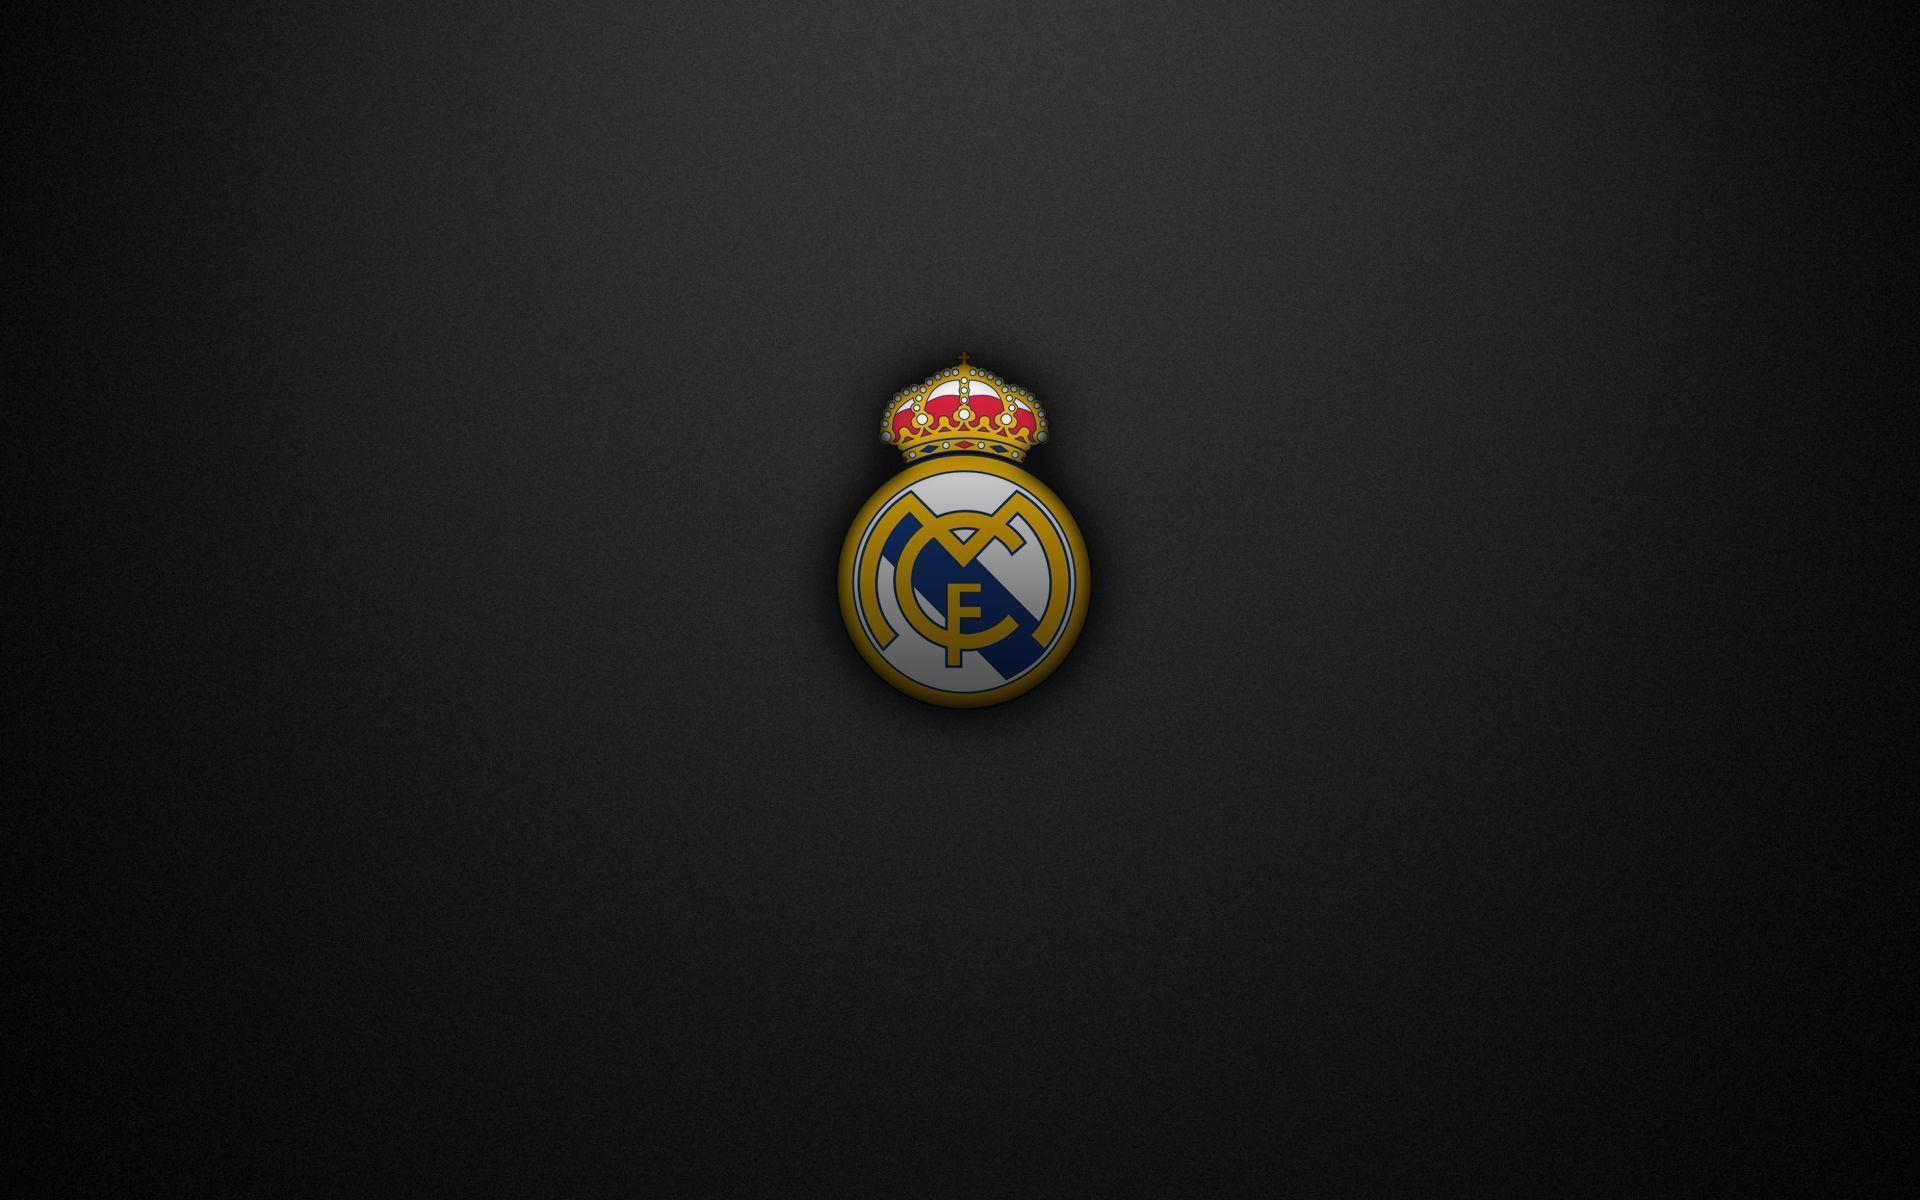 Real Madrid Wallpaper High Quality 2015 Wallpaper. Cool